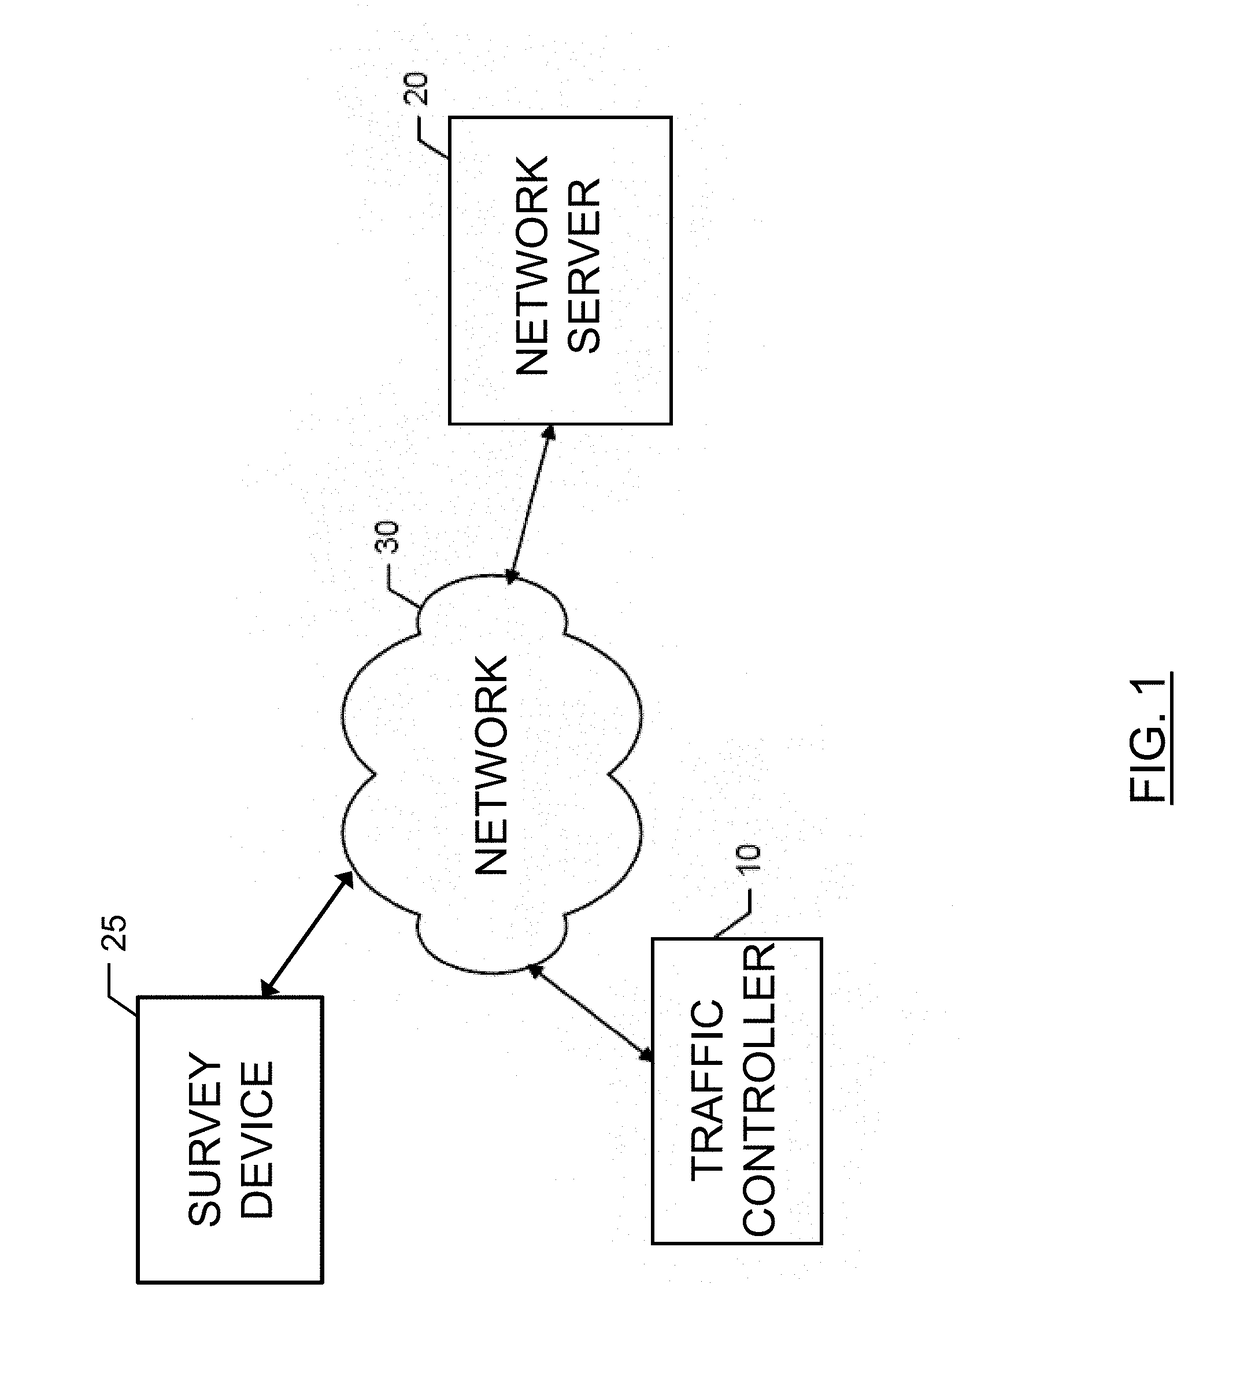 Method, apparatus and computer program product for traffic lane and signal control identification and traffic flow management